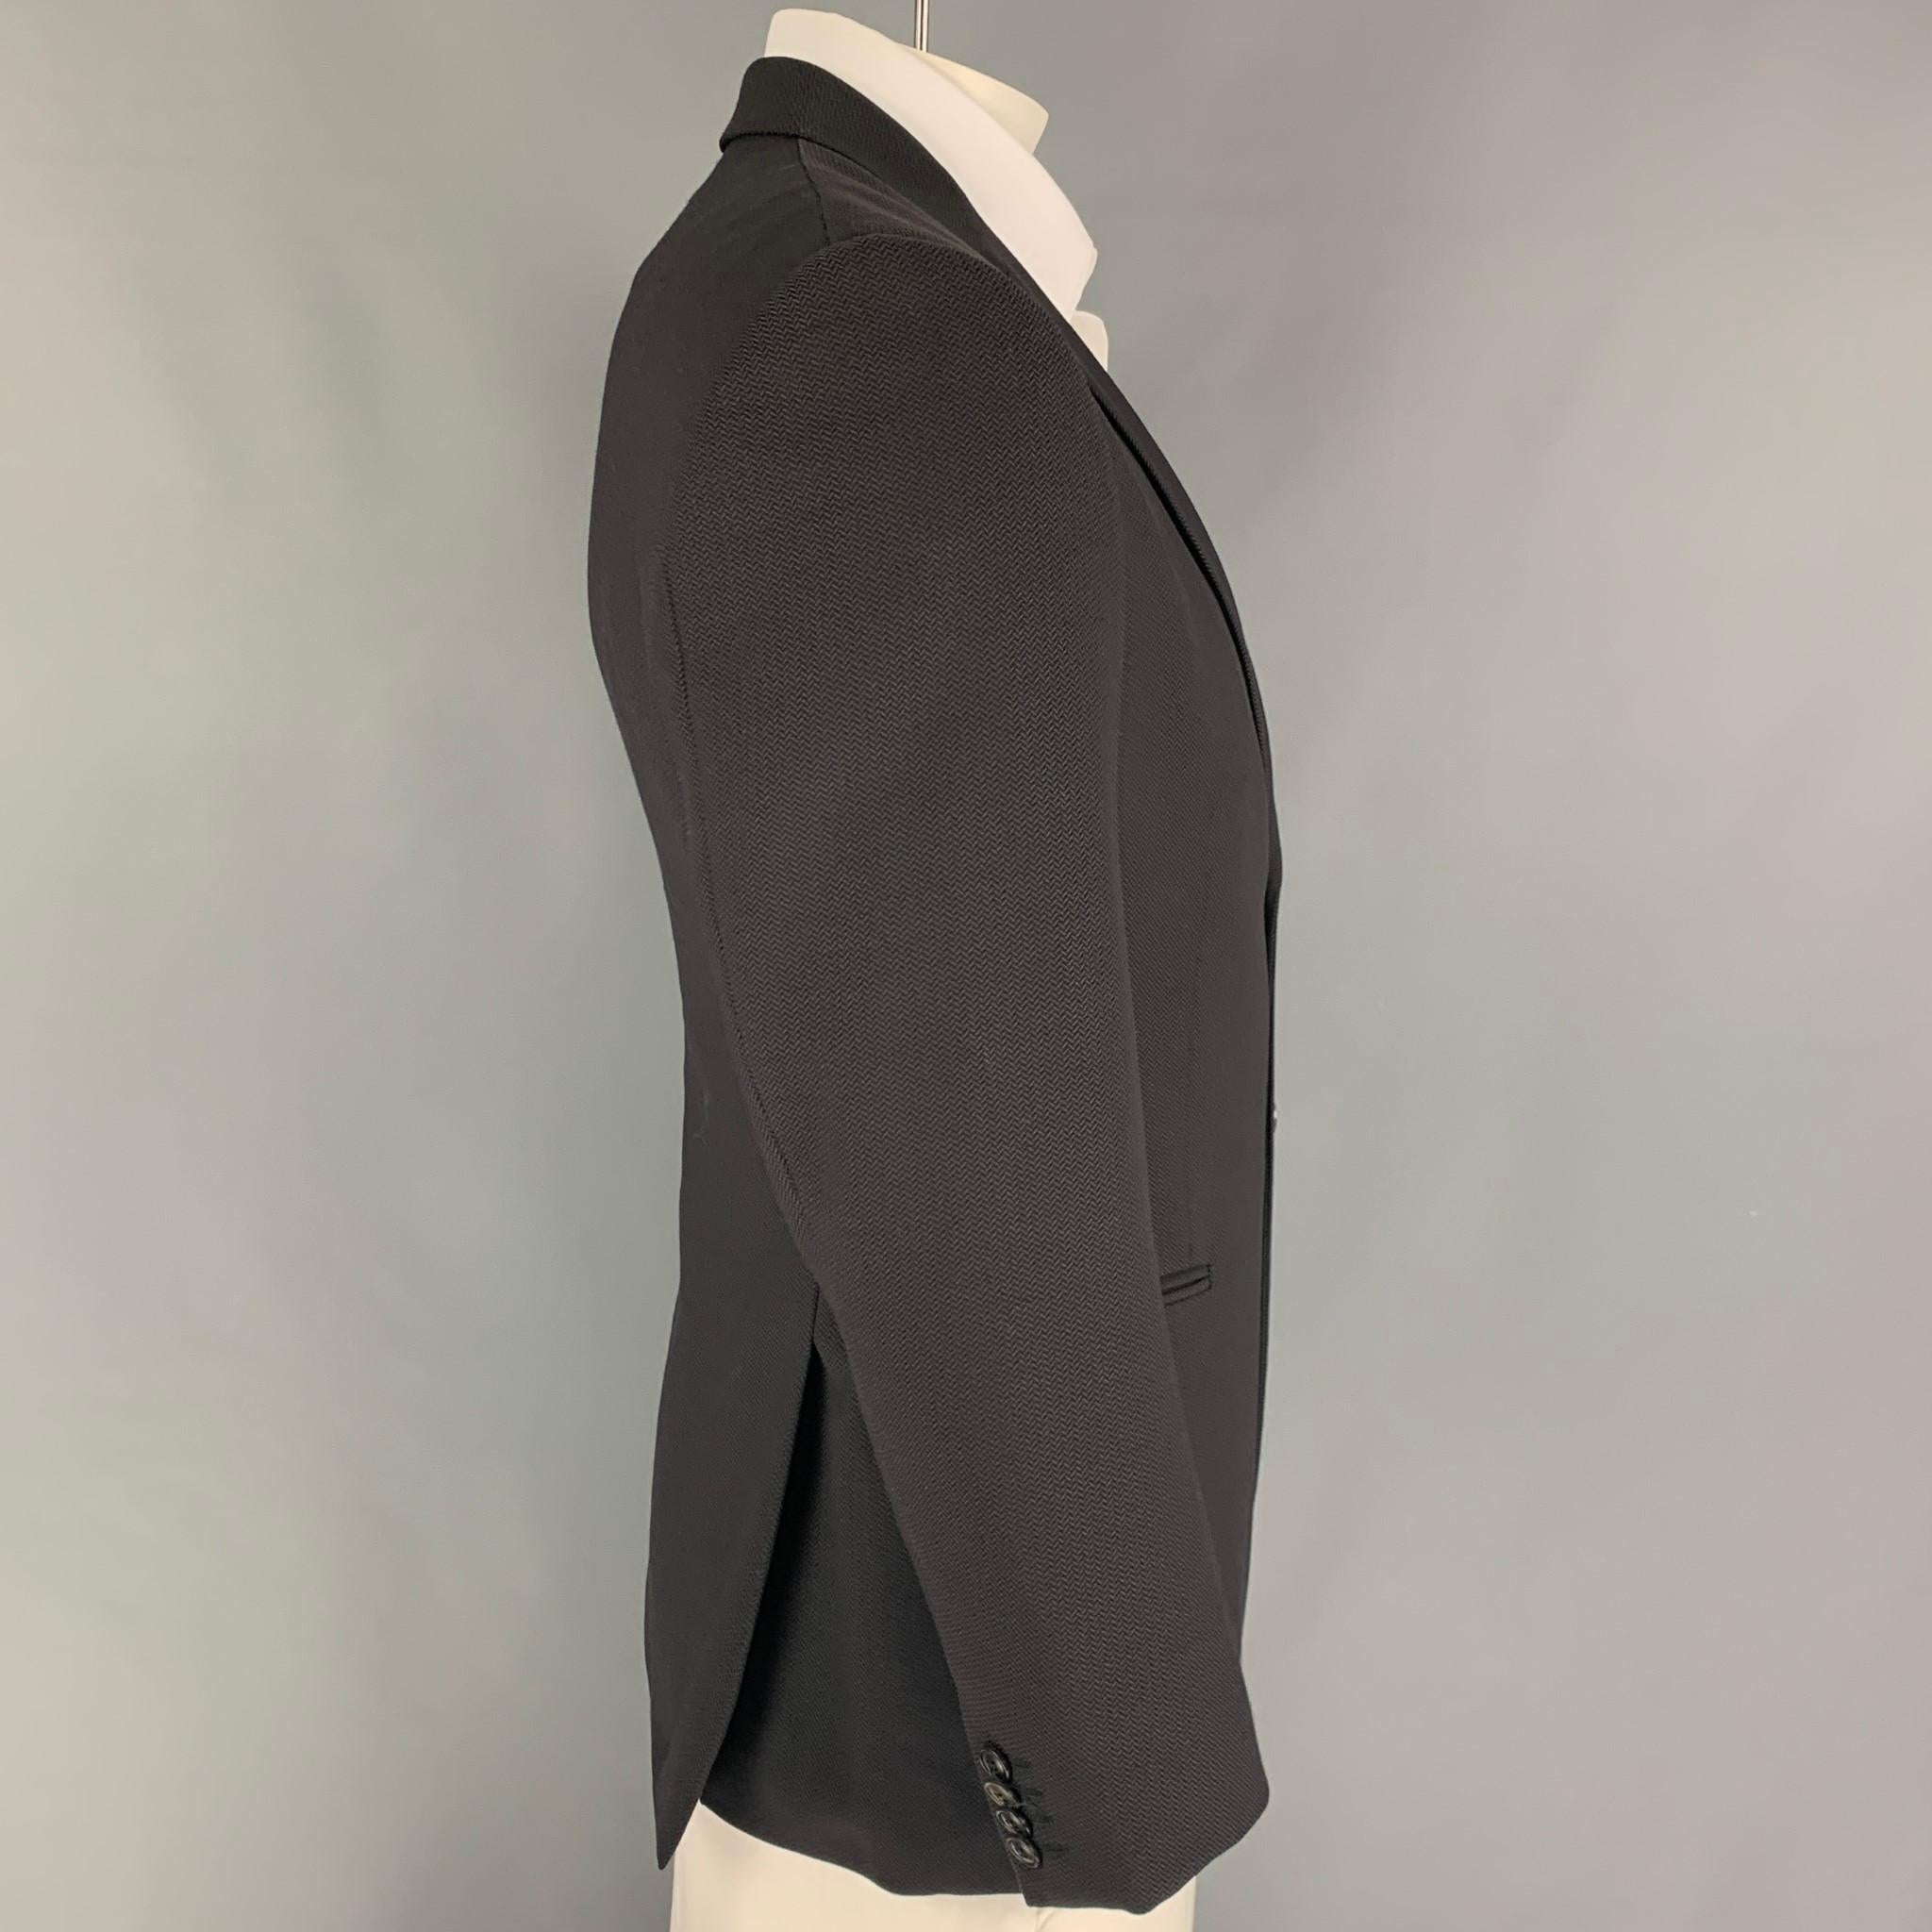 GIORGIO ARMANI sport coat comes in a black lana wool with a full liner featuring a notch lapel, slit pockets, double back vent, and a double button closure. Made in Italy.

Very Good Pre-Owned Condition.
Marked: 50

Measurements:

Shoulder: 18